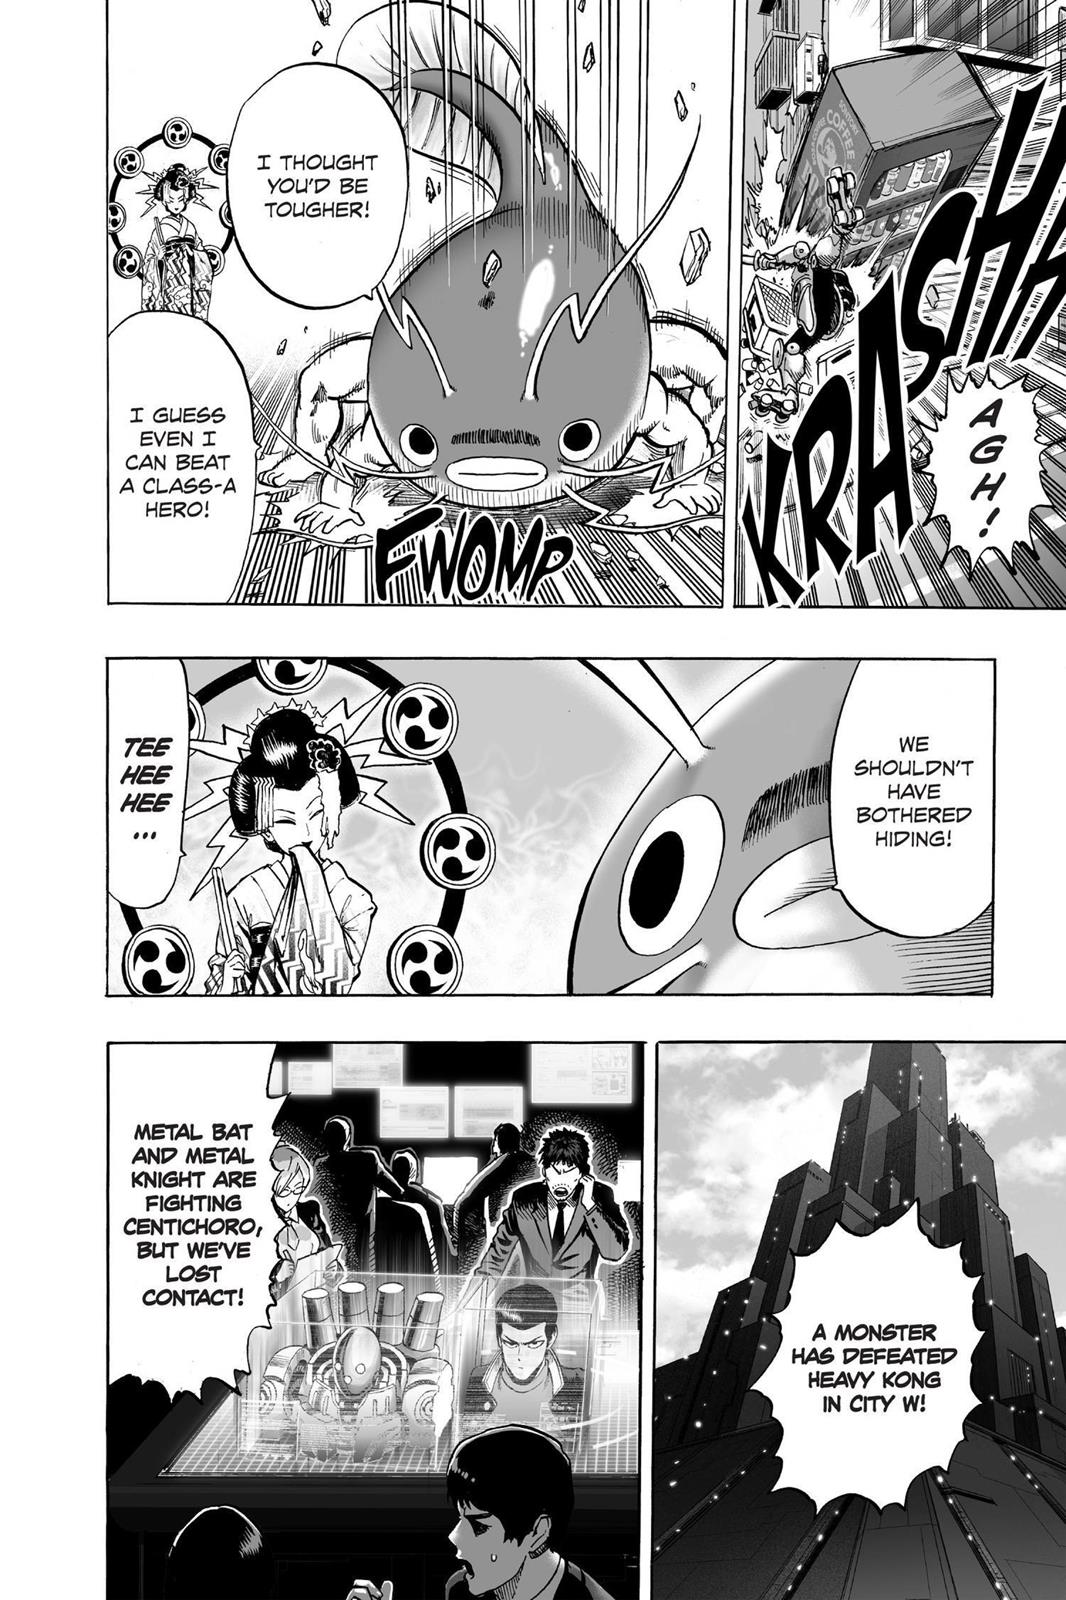 One-Punch Man, Punch 61 image 21